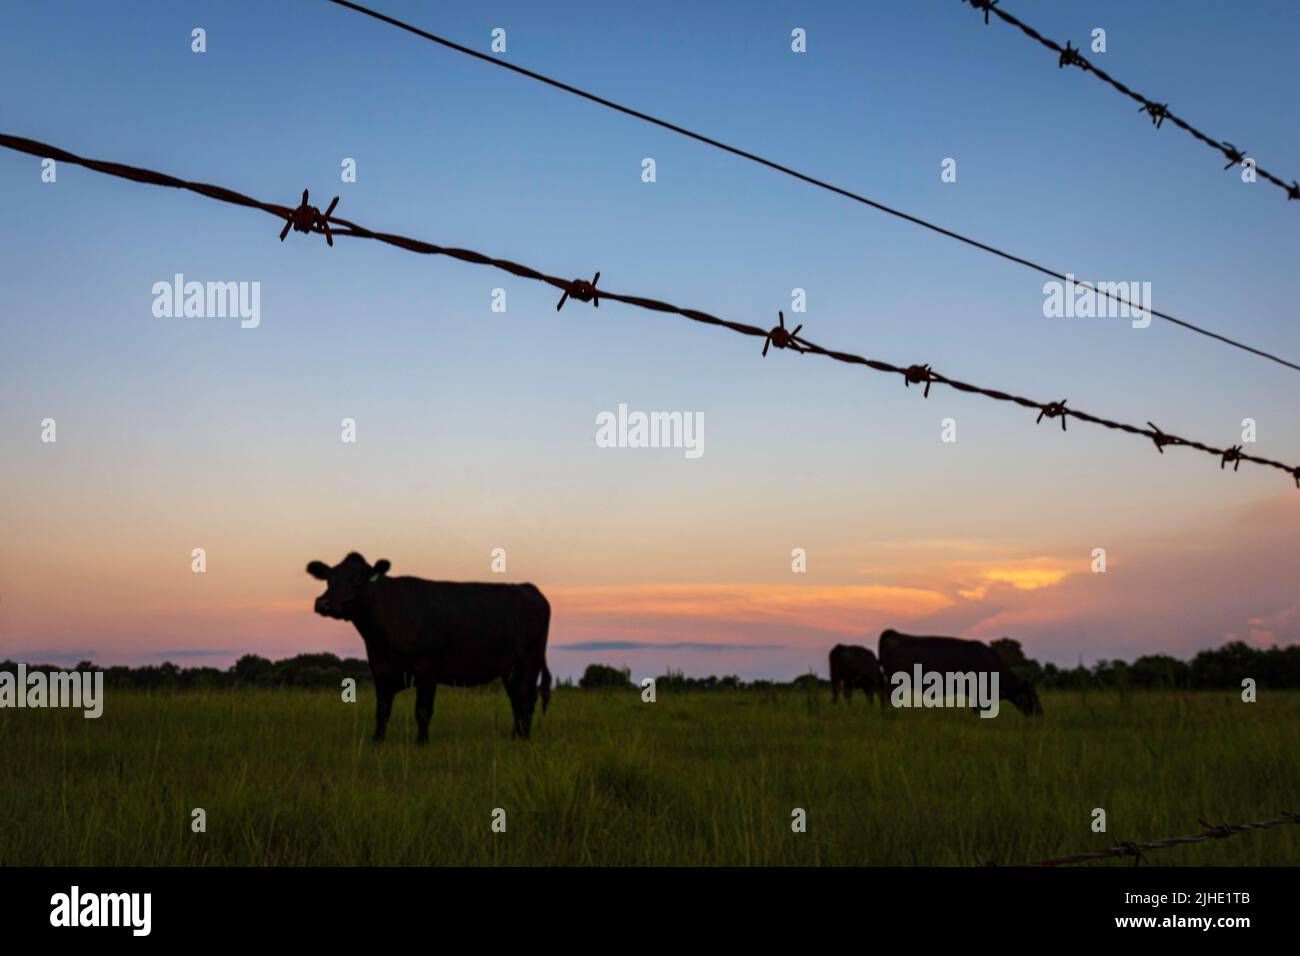 Agricultural background - barbed wire in focus in foreground with beef cattle in silhouette against a colorful sunset in the background. Stock Photo